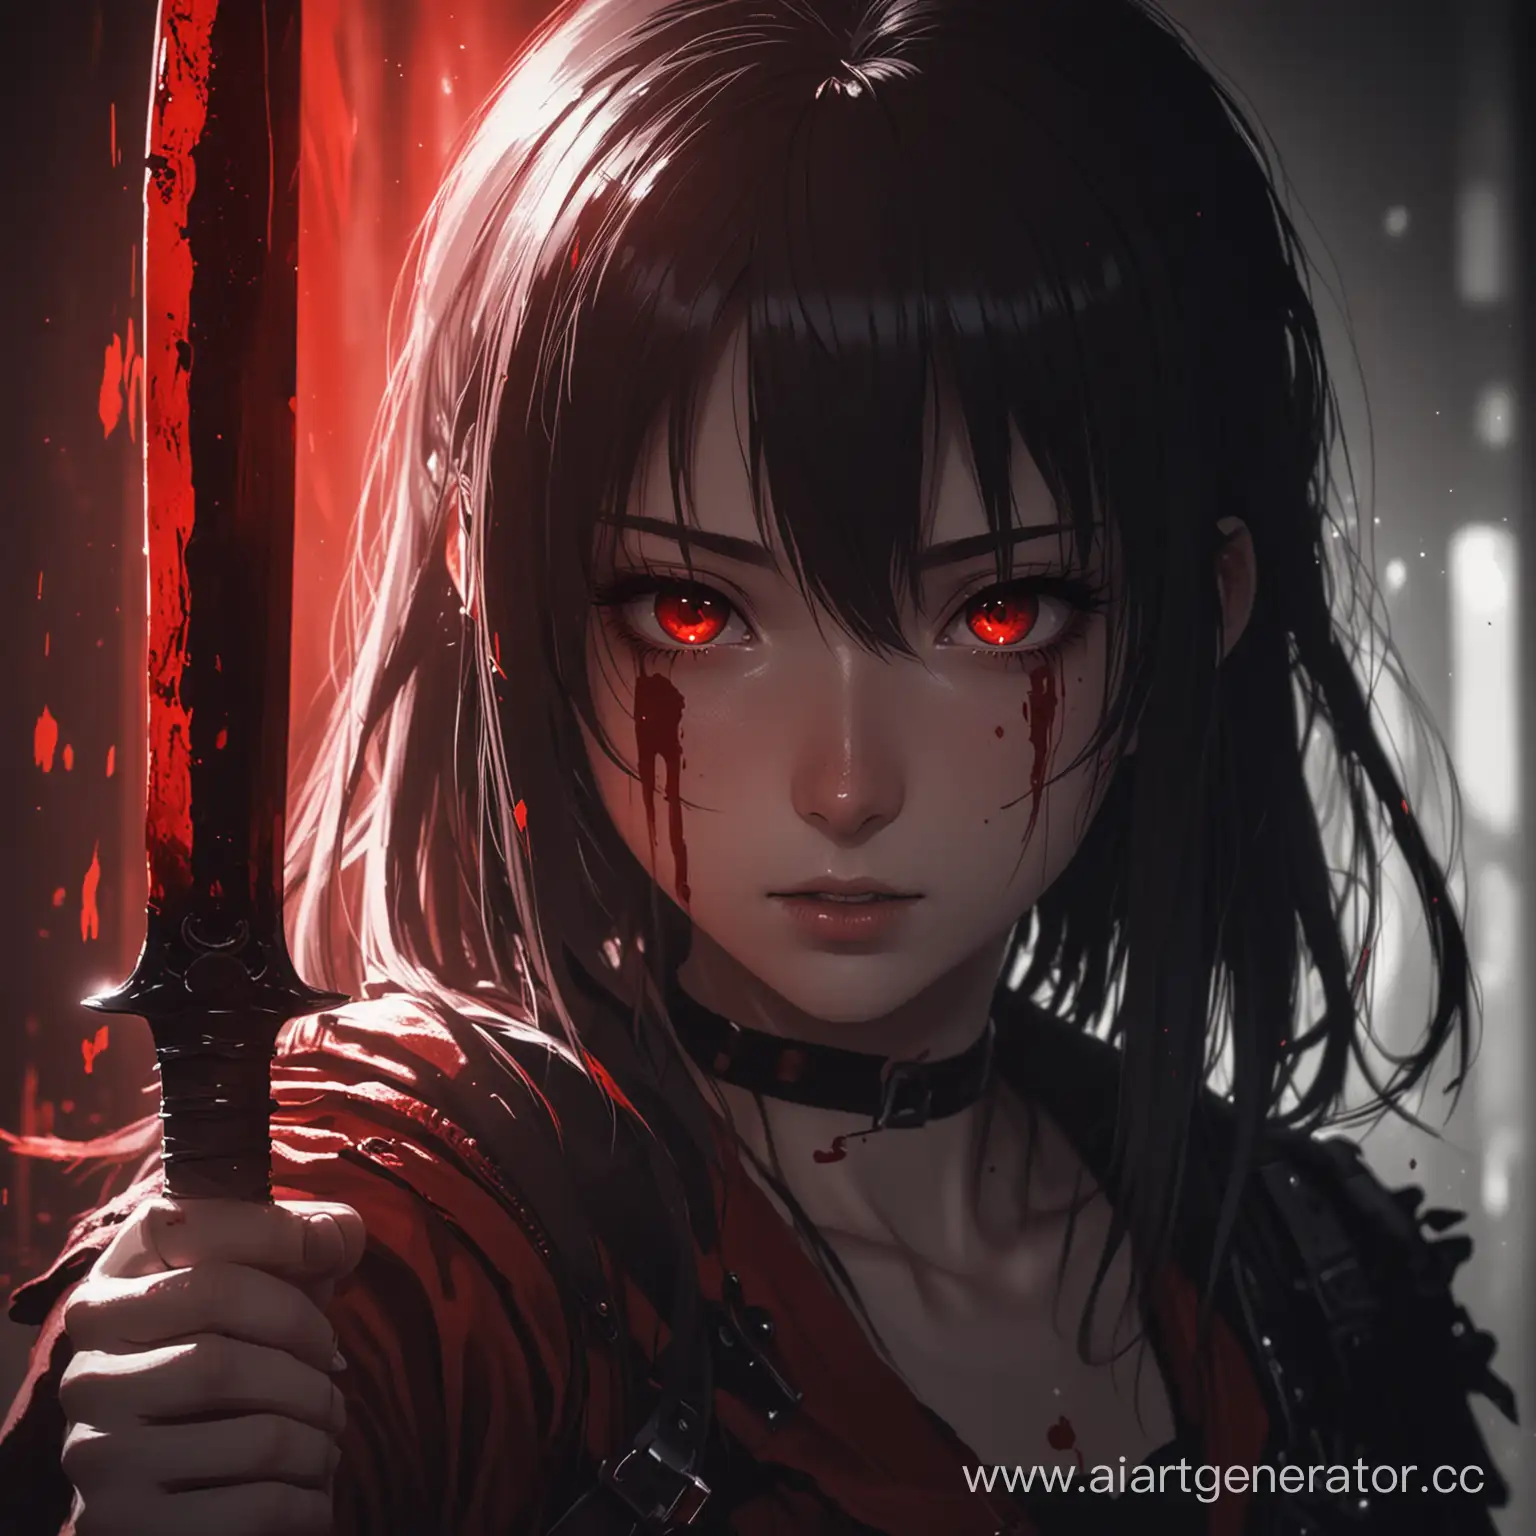 Mysterious-Anime-Girl-Wielding-Bloodied-Knife-in-Redfiltered-Darkness